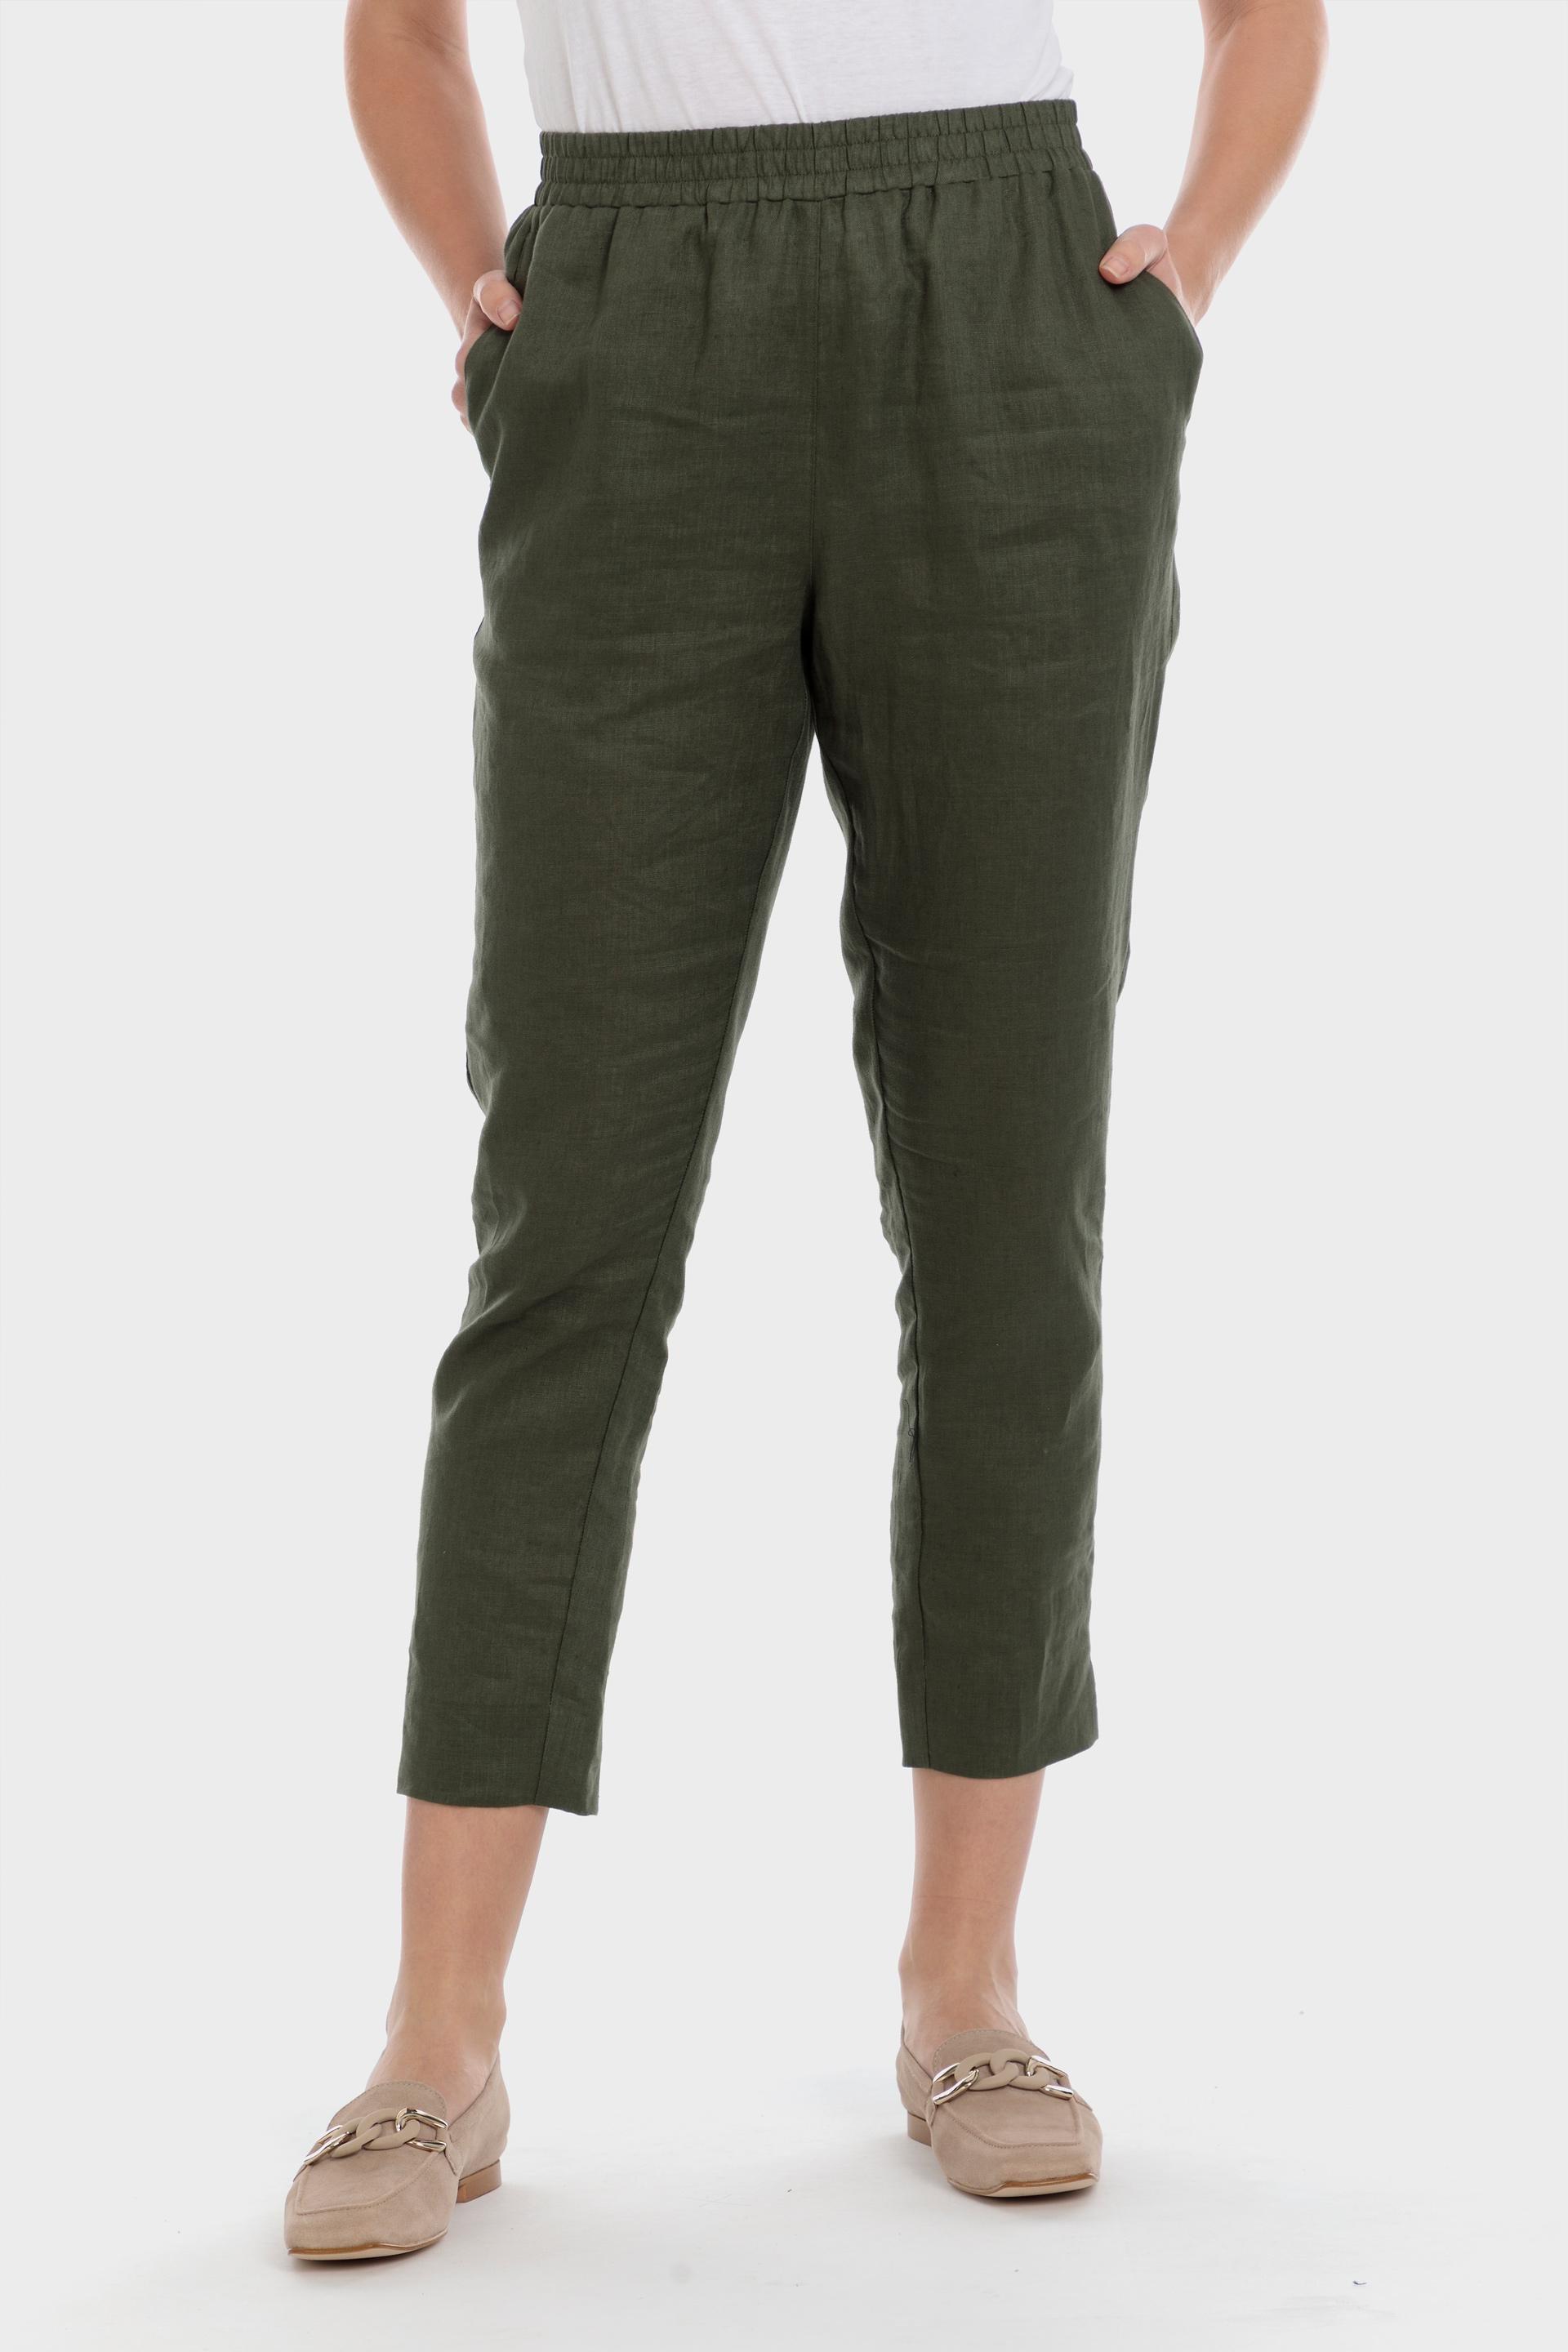 Punt Roma - Green Linen Trousers